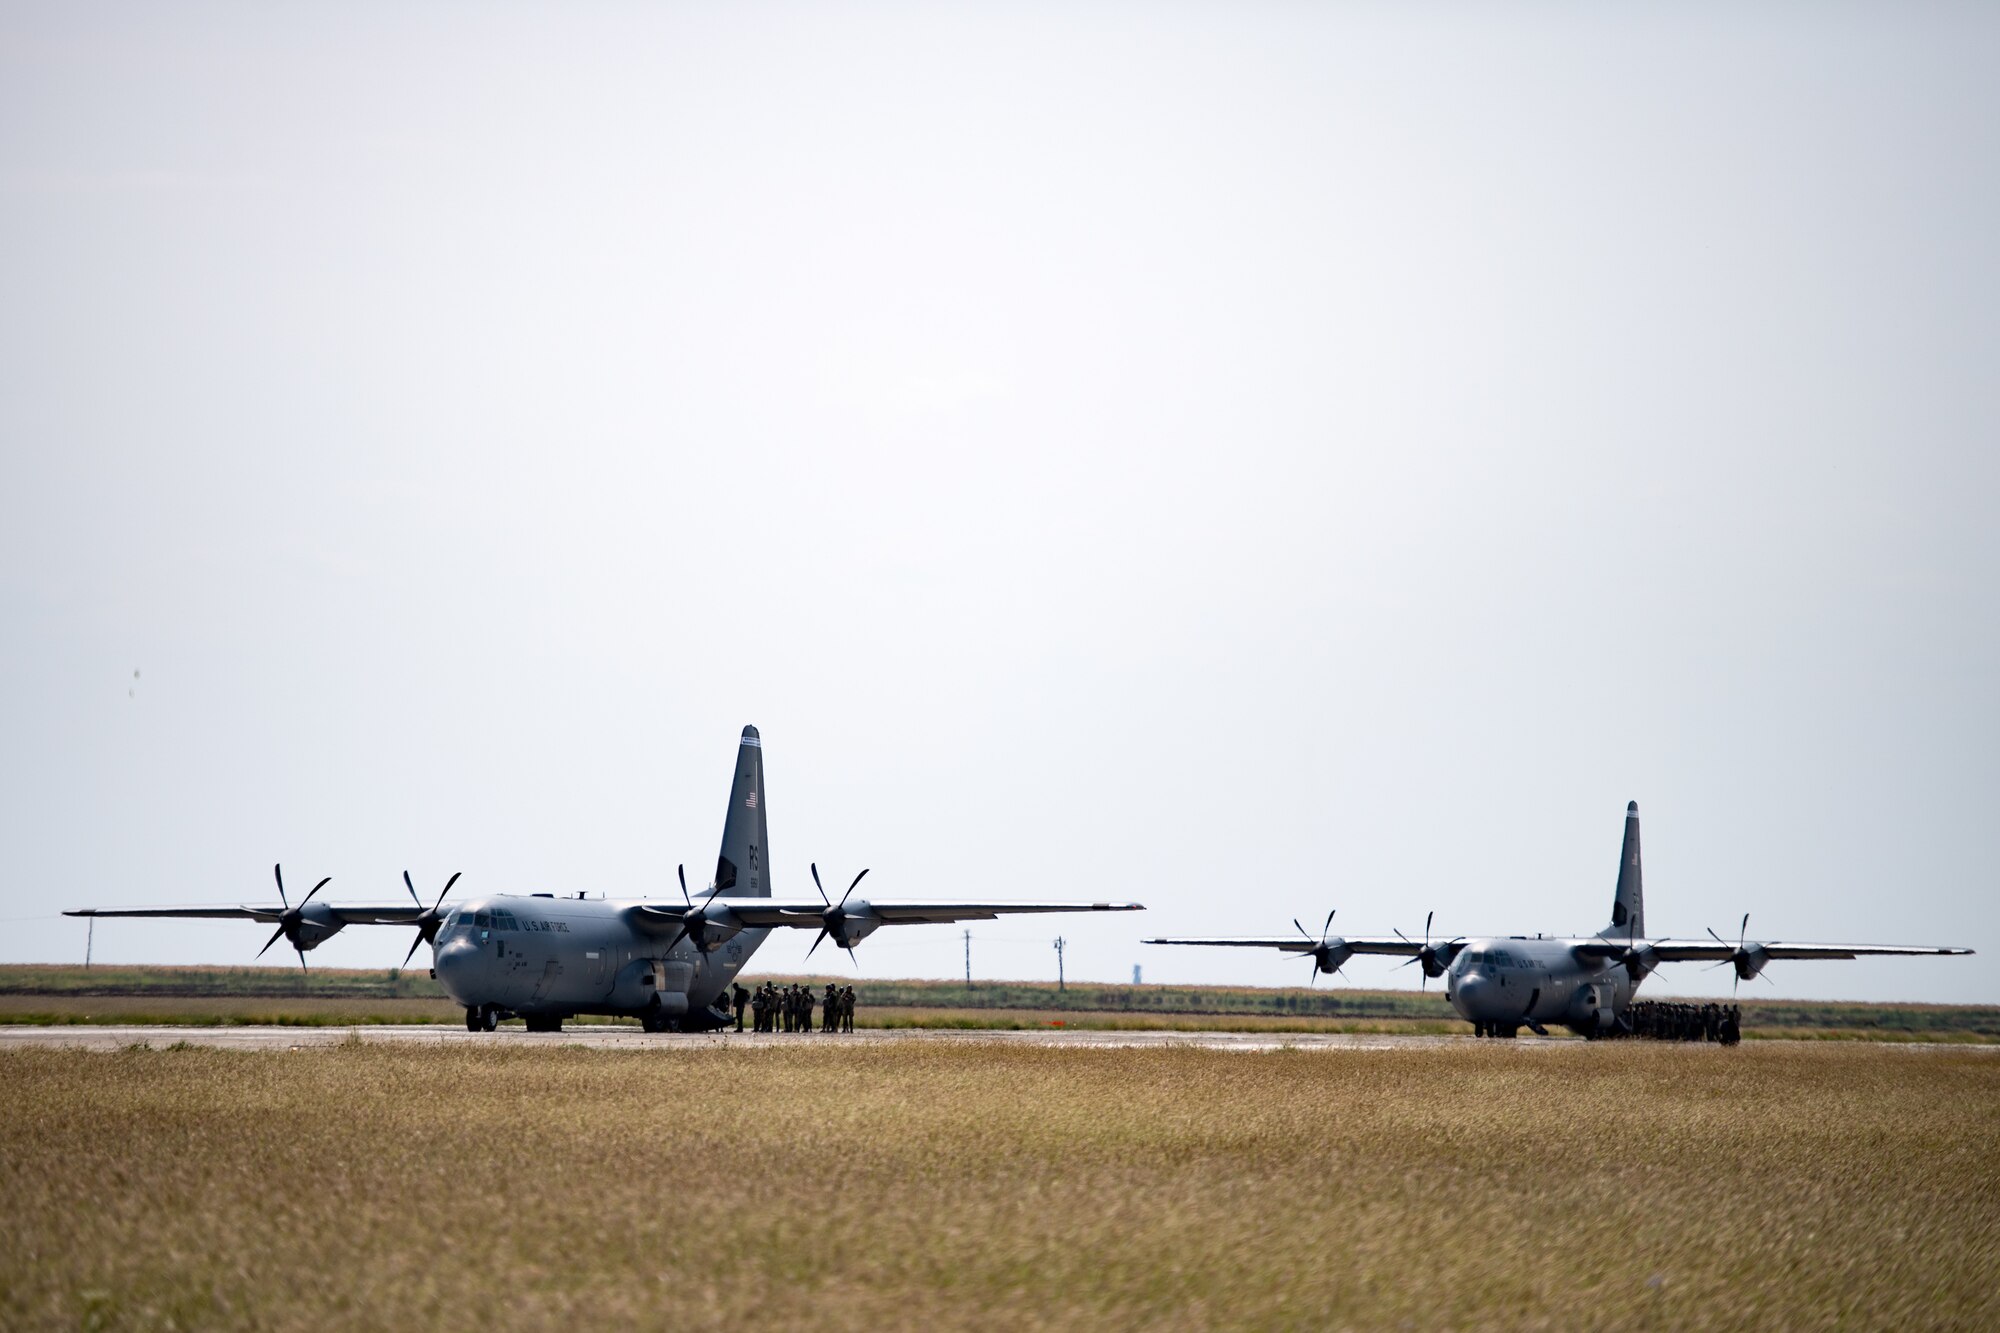 Romanian air force paratroopers board U.S. Air Force C-130J Super Hercules aircraft assigned to the 37th Airlift Squadron, Ramstein Air Base, Germany, on Boboc Air Base, Romania, Aug. 23, 2018. The aircraft then flew over the installation as the paratroopers performed static-line drops as part of exercise Carpathian Summer 2018. (U.S. Air Force photo by Senior Airman Devin Boyer)